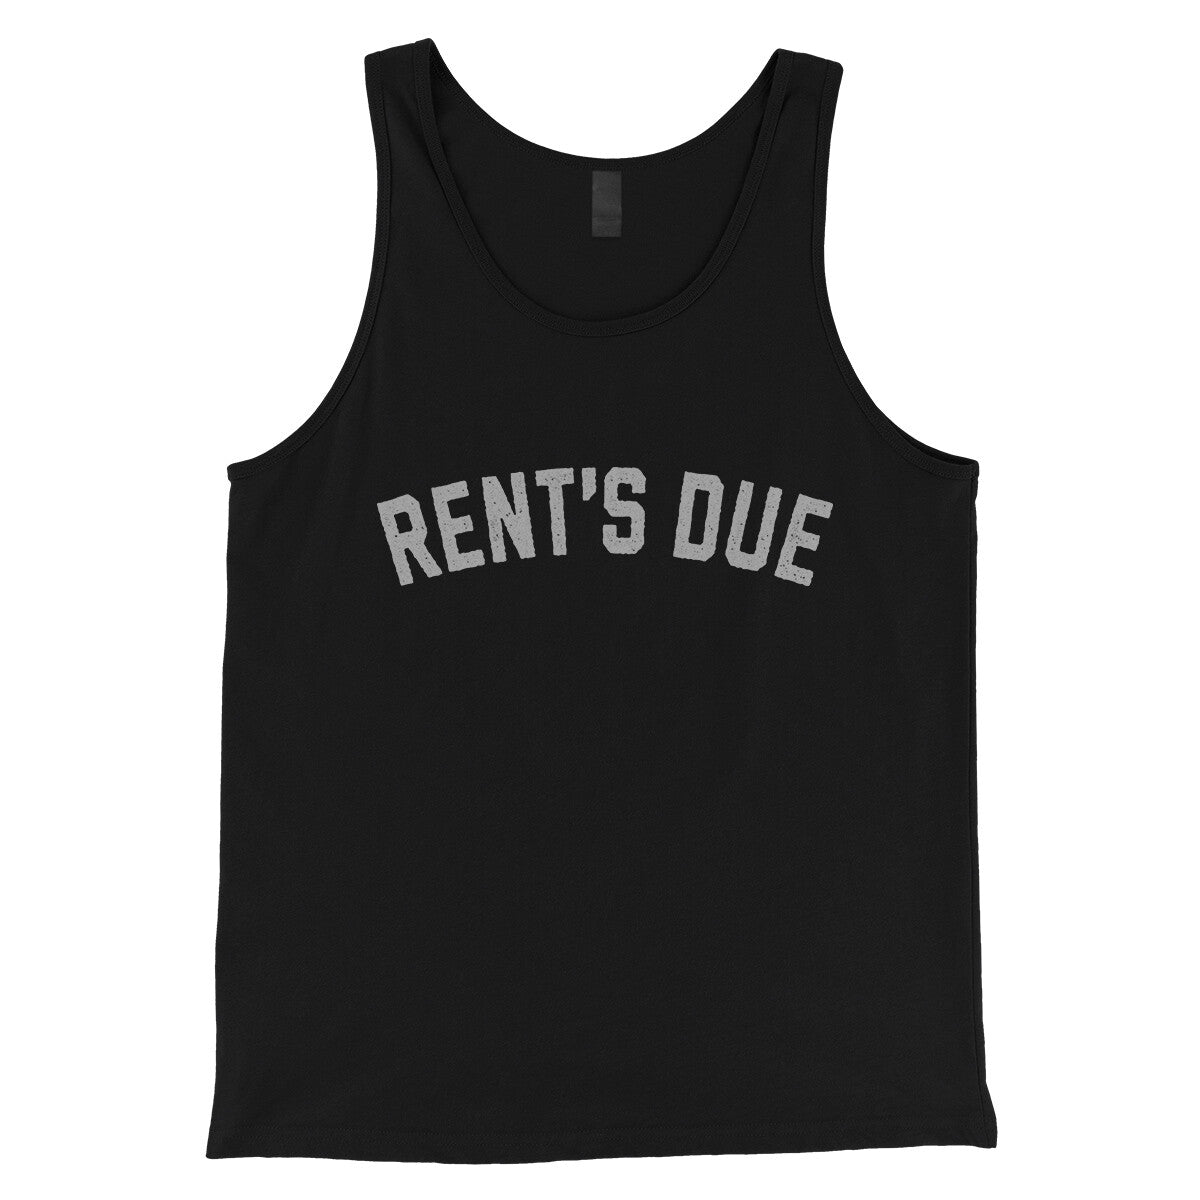 Rent's Due in Black Color